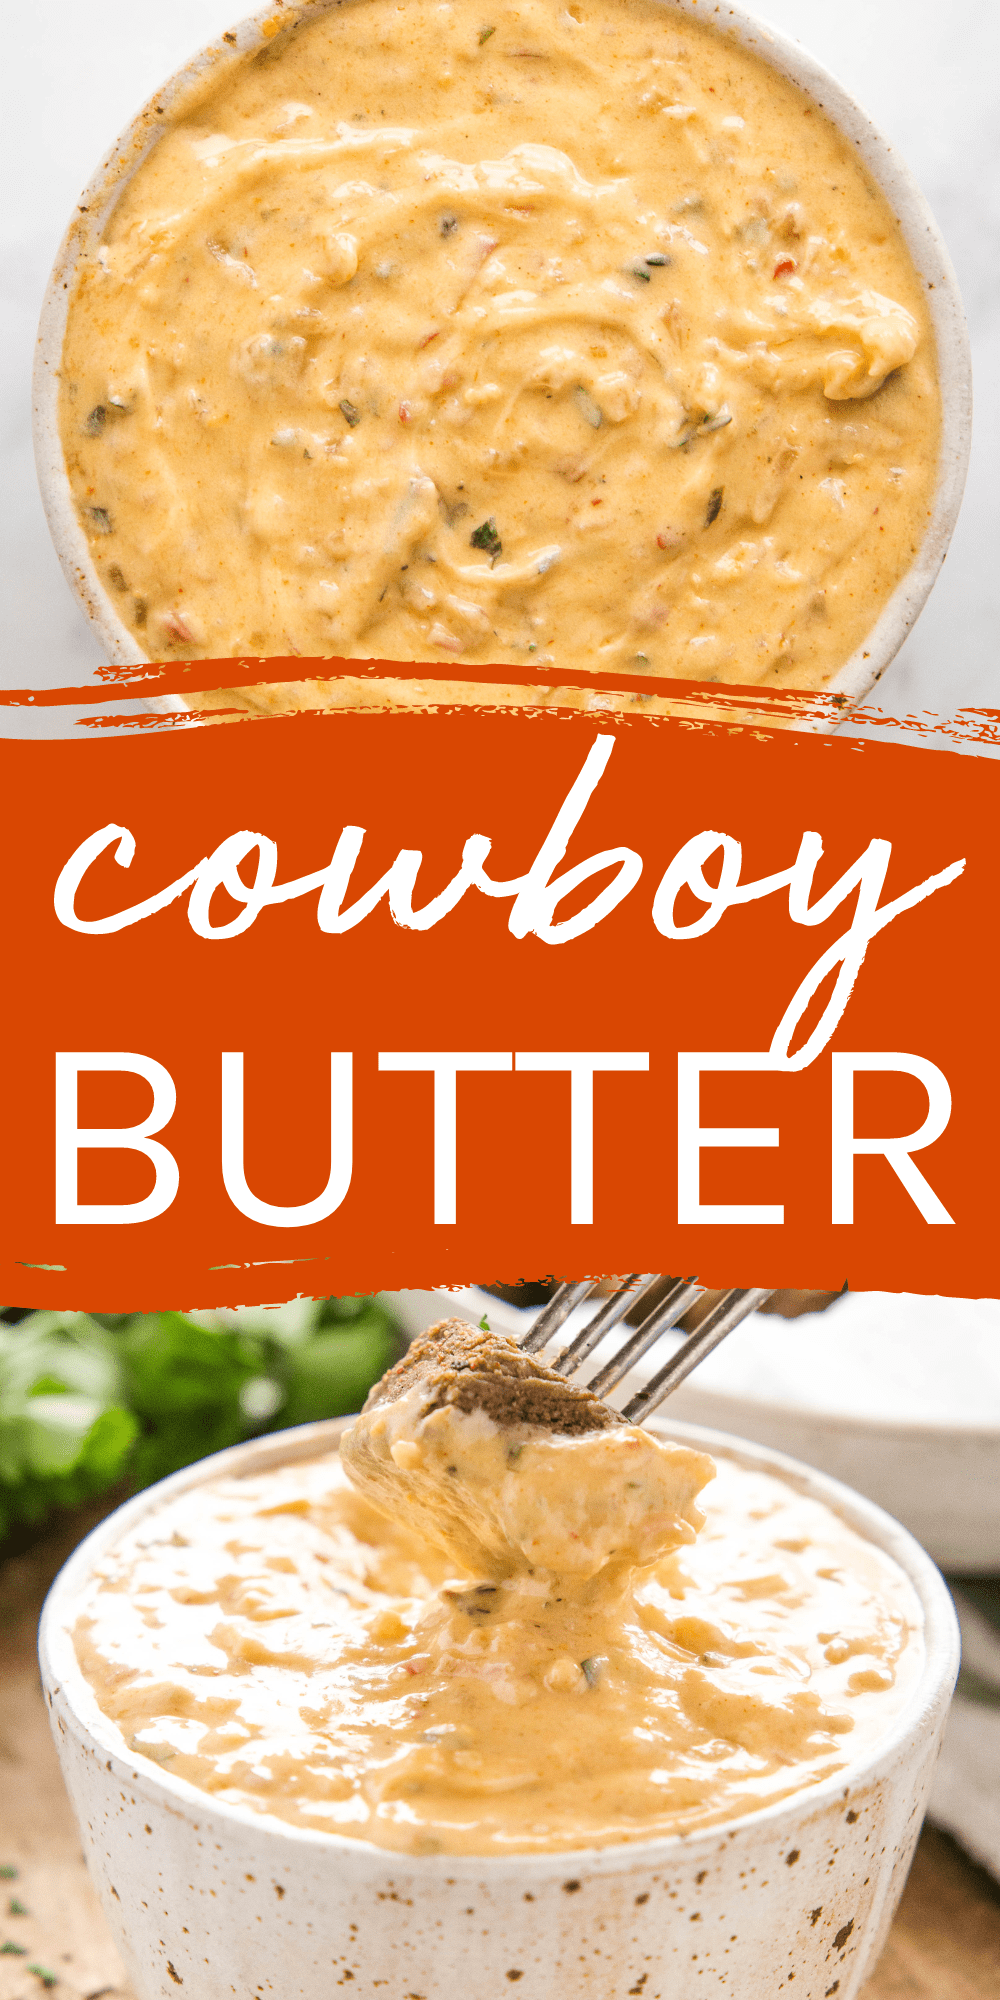 This Cowboy Butter recipe is a creamy, savoury butter sauce that's packed with herbs and spices! Serve it as a topping or dip for steak, chicken, seafood, or grilled vegetables. Recipe from thebusybaker.ca! #cowboybutter #buttersauce #homemadebutter #compoundbutter #saucerecipe #easysauce #steaksauce #steakrecipe #buttersteak #steakbutter via @busybakerblog